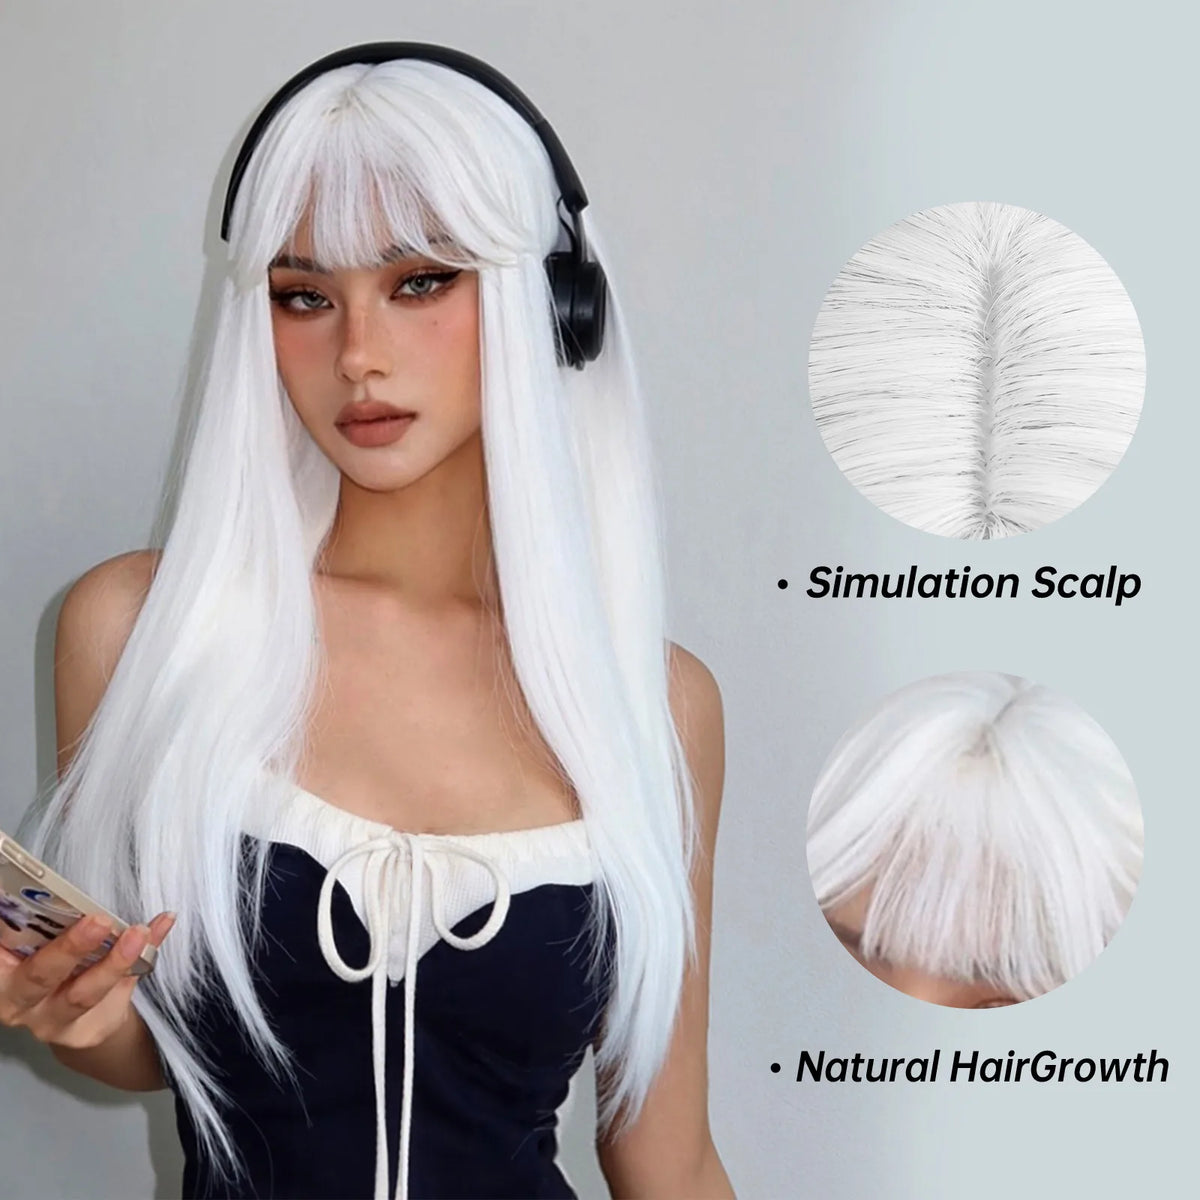 White Long Straight Synthetic Wigs for Women Colorful Cosplay Party Fake Hair with Bangs White Wig HighTemperature